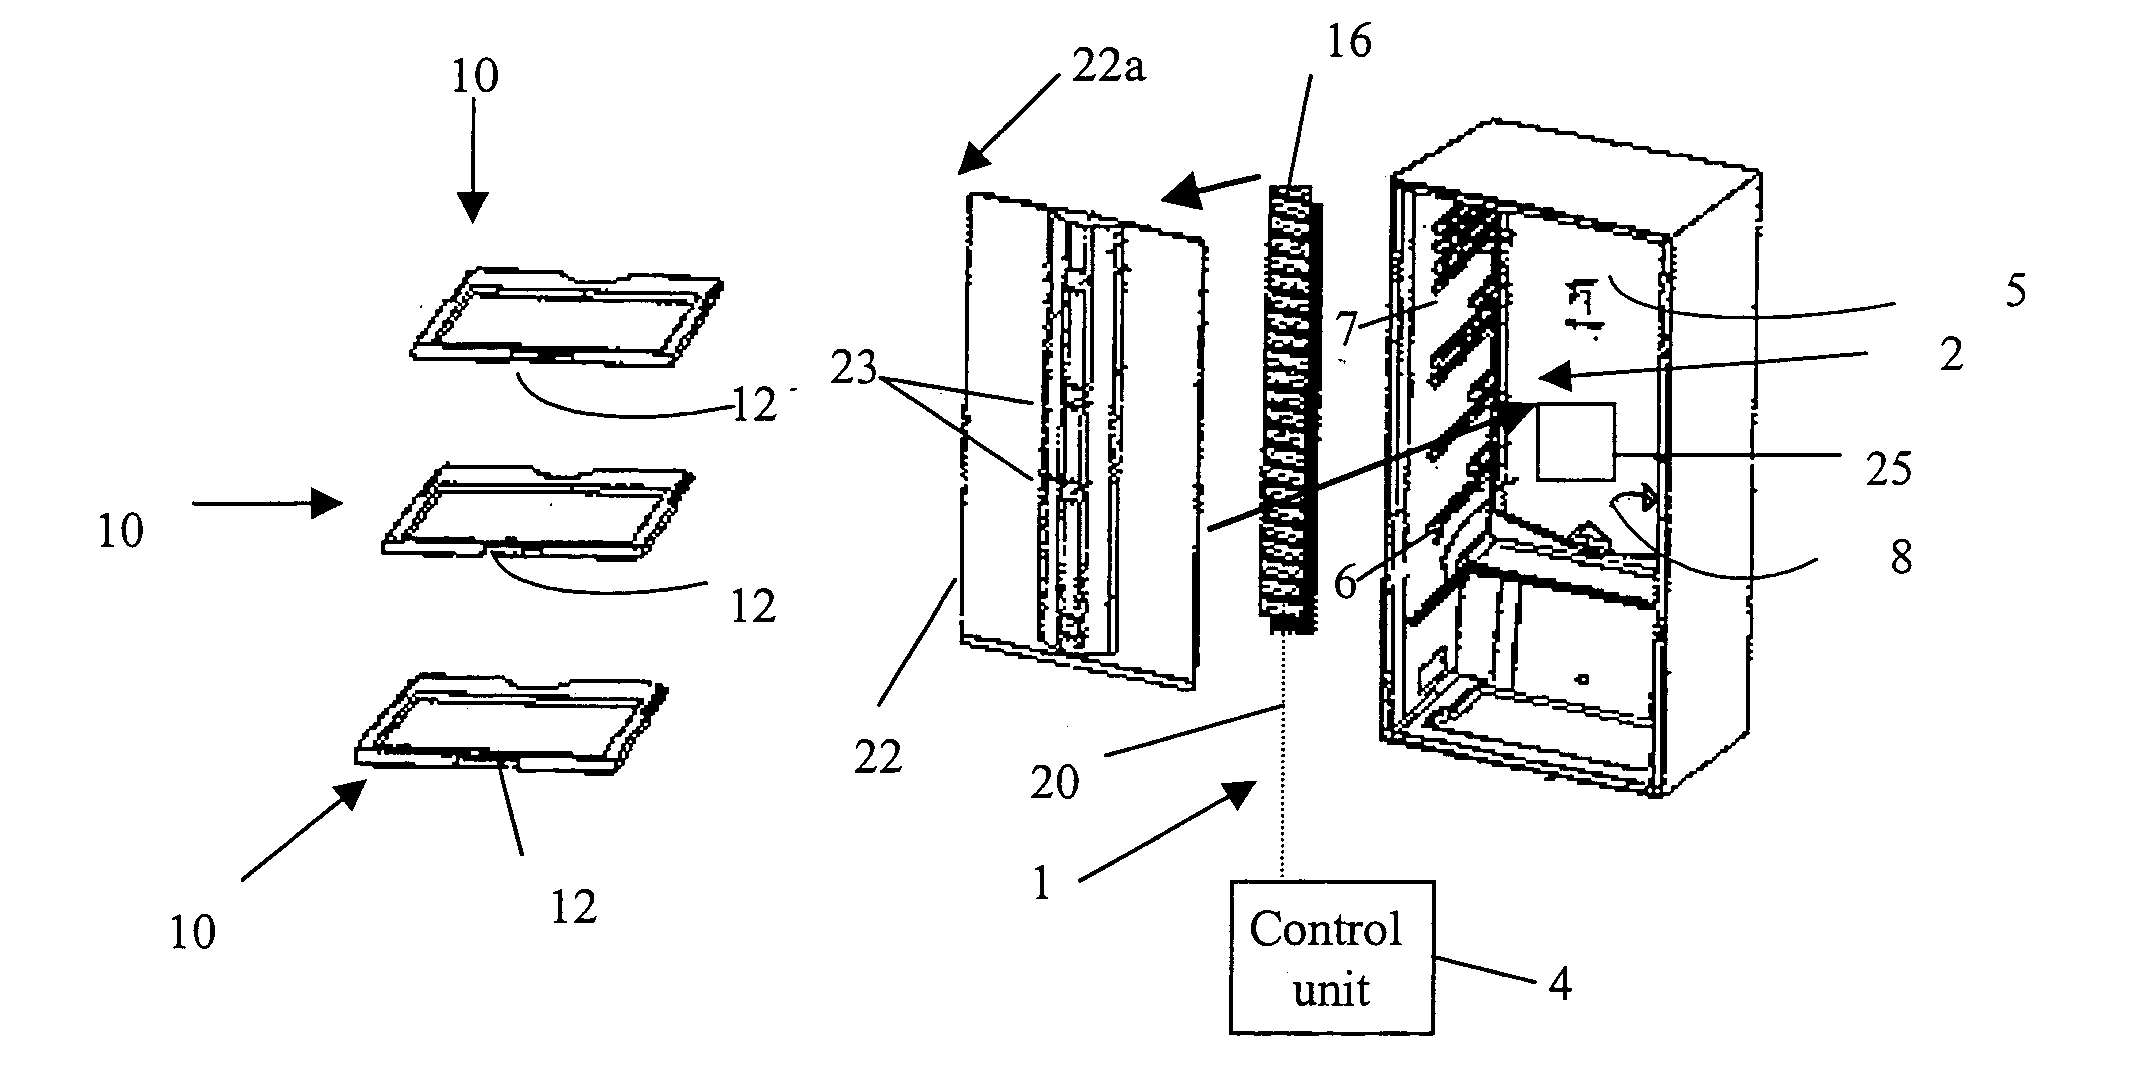 Refrigerator with internal compartment divisible into independent temperature zones